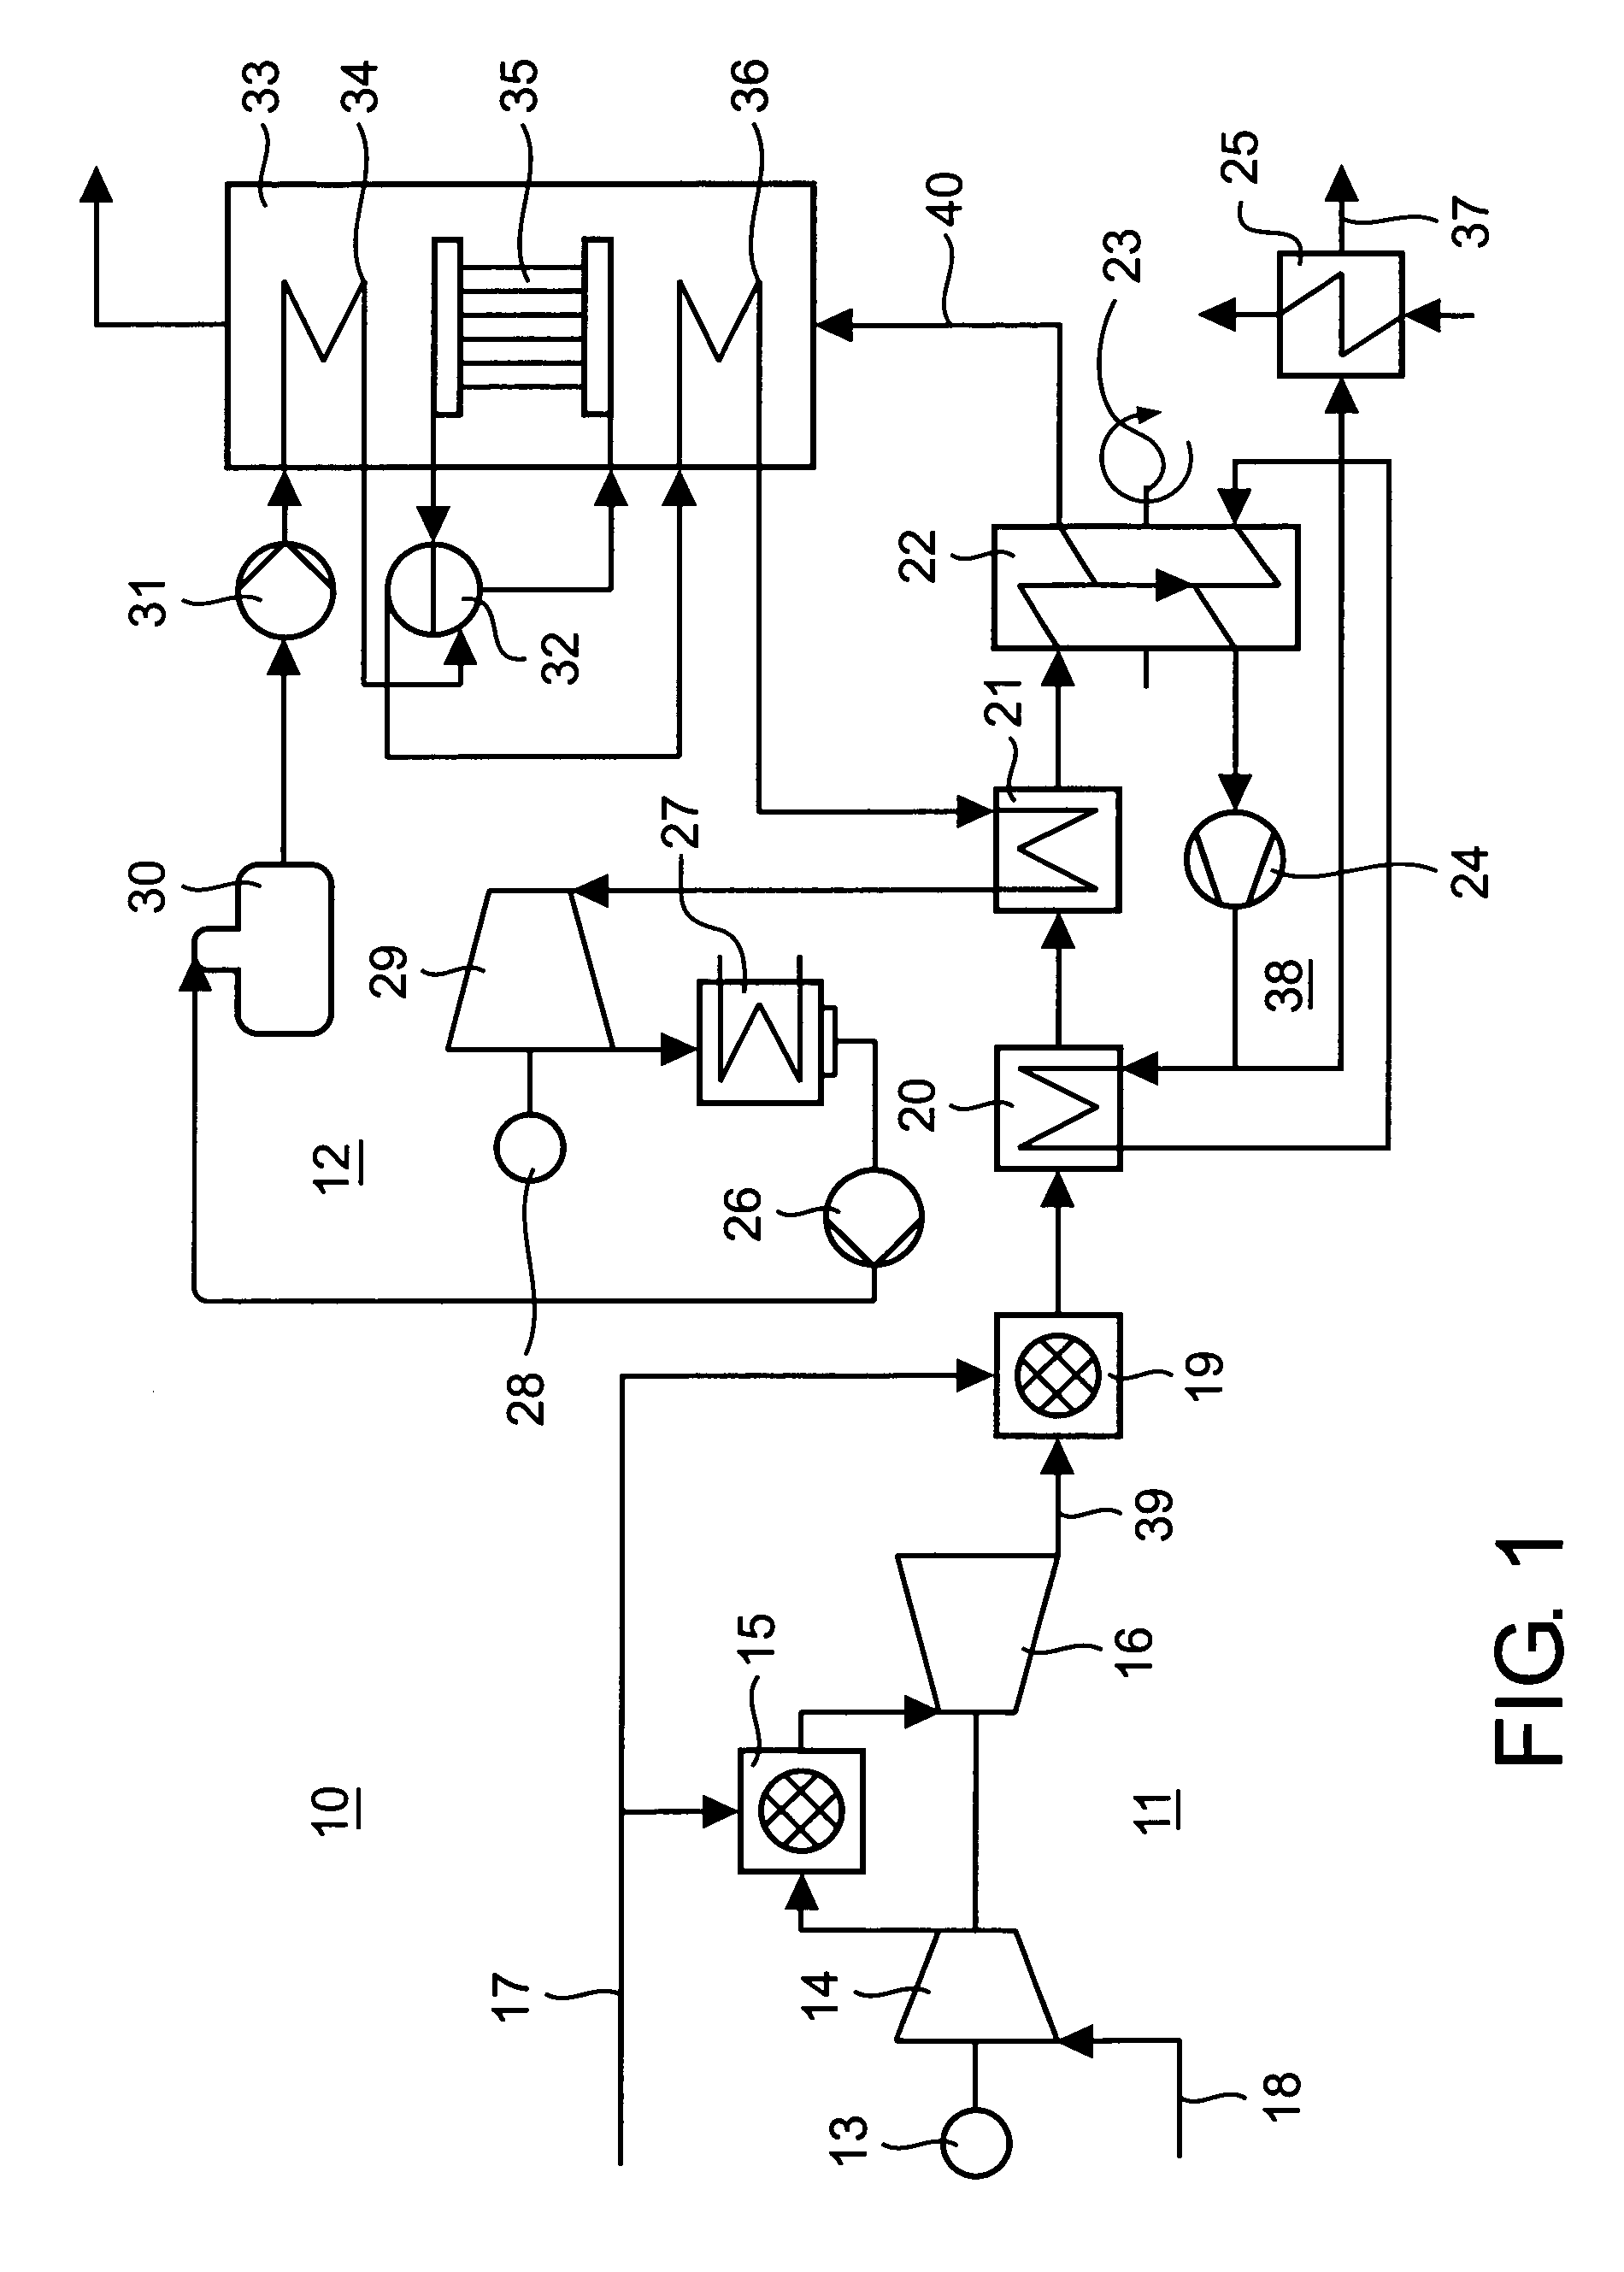 Device for removing carbon dioxide from exhaust gas